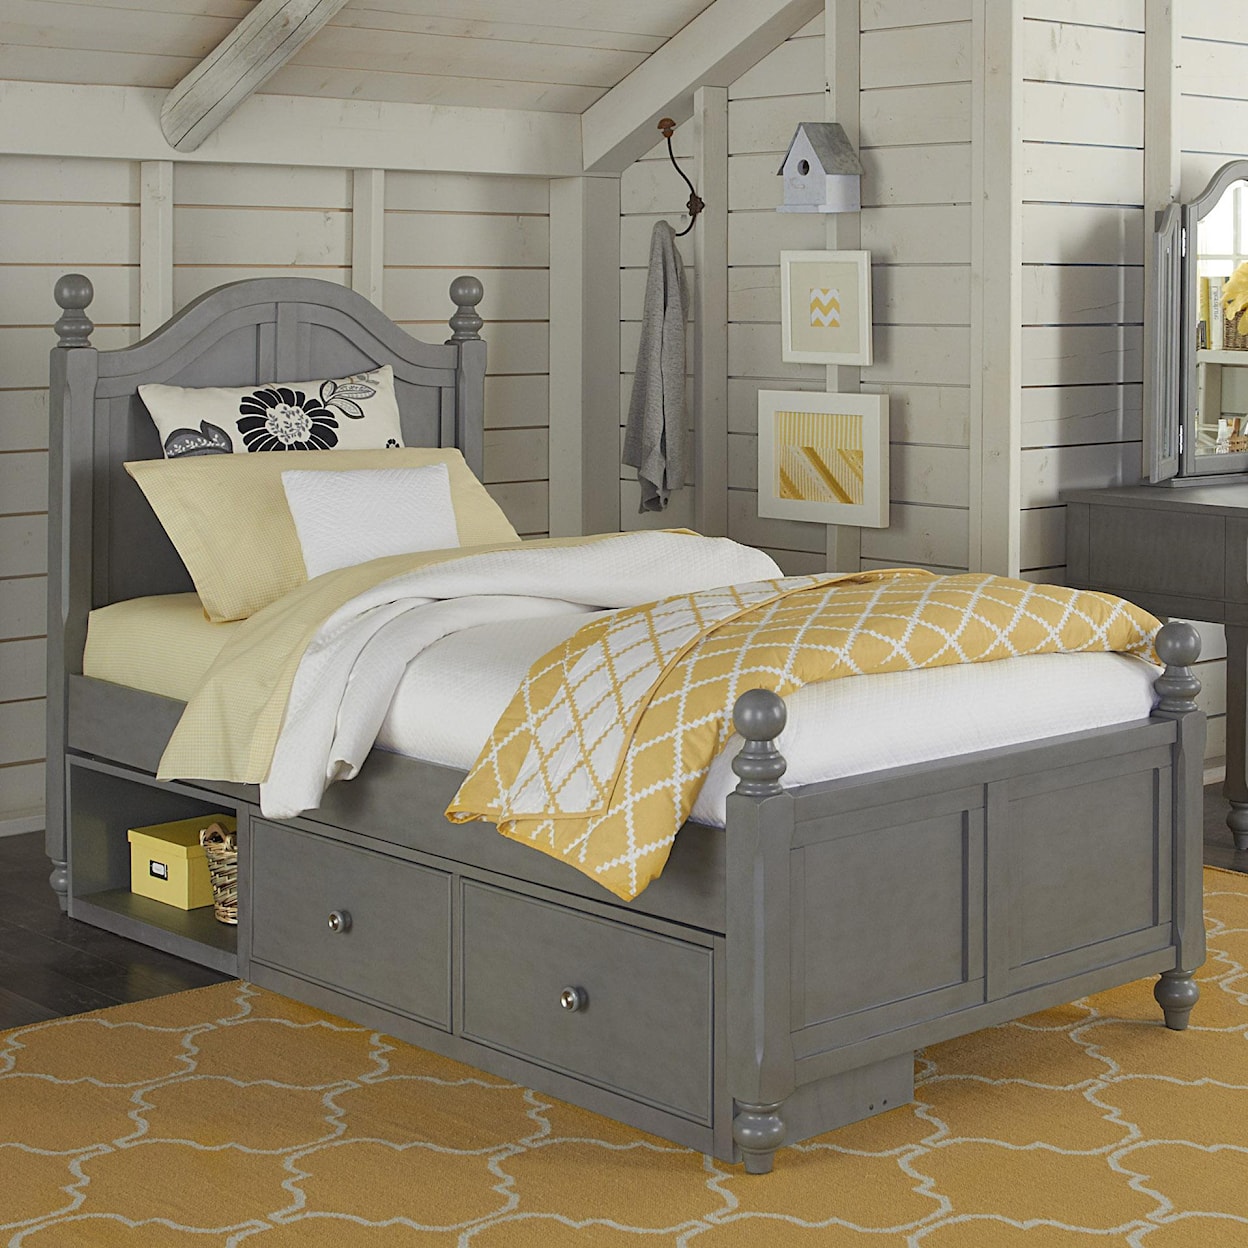 Hillsdale Kids Lake House Twin Bed and Storage Unit